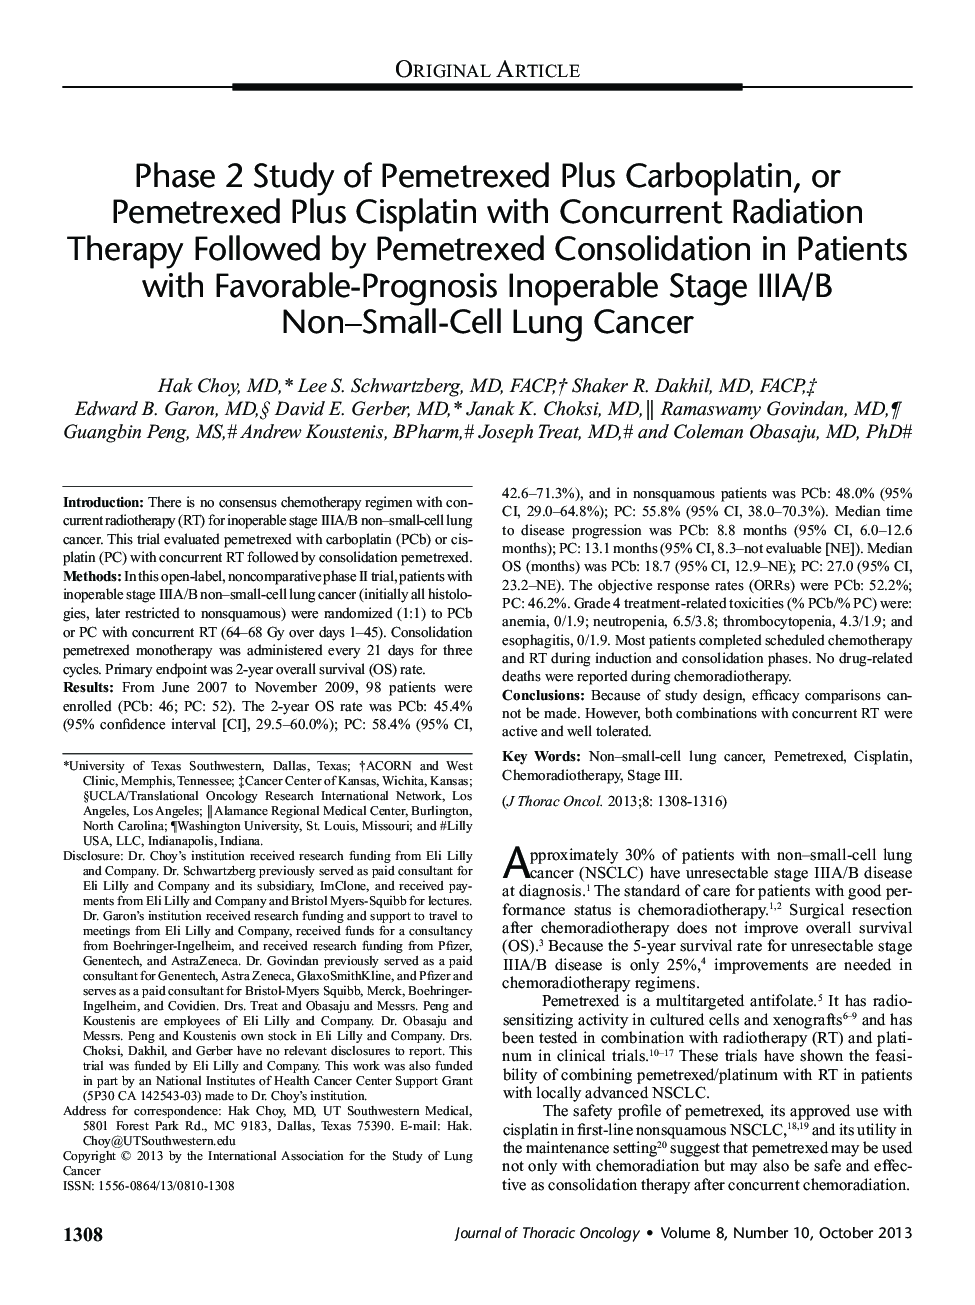 Phase 2 Study of Pemetrexed Plus Carboplatin, or Pemetrexed Plus Cisplatin with Concurrent Radiation Therapy Followed by Pemetrexed Consolidation in Patients with Favorable-Prognosis Inoperable Stage IIIA/B Non–Small-Cell Lung Cancer 